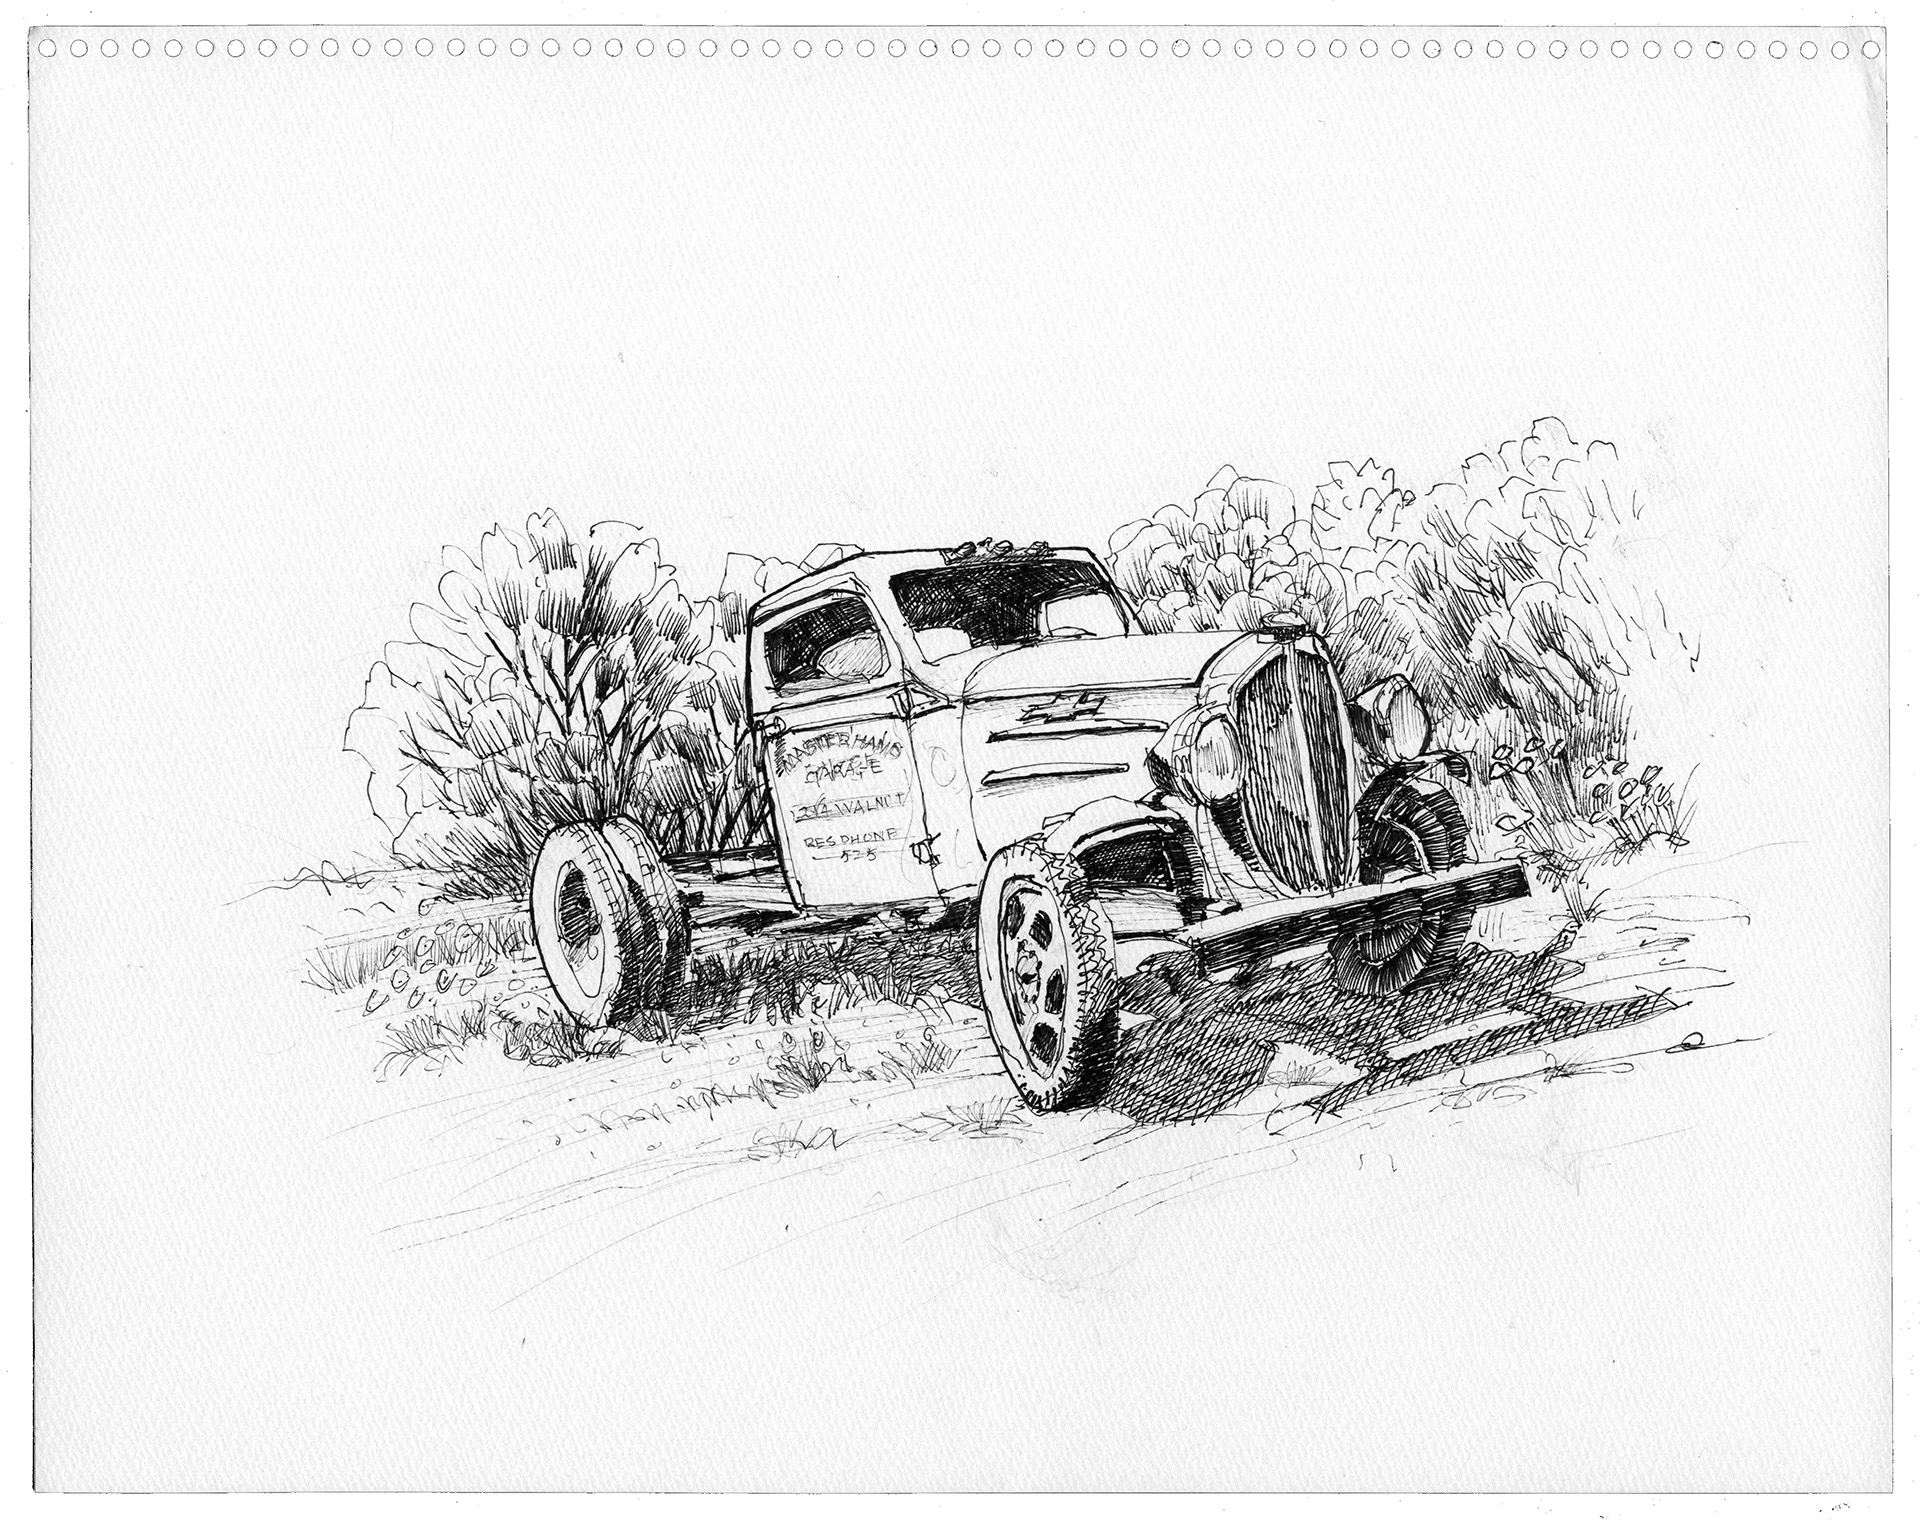 steve bribach's 36 chevy truck, ink on paper, 11x14in